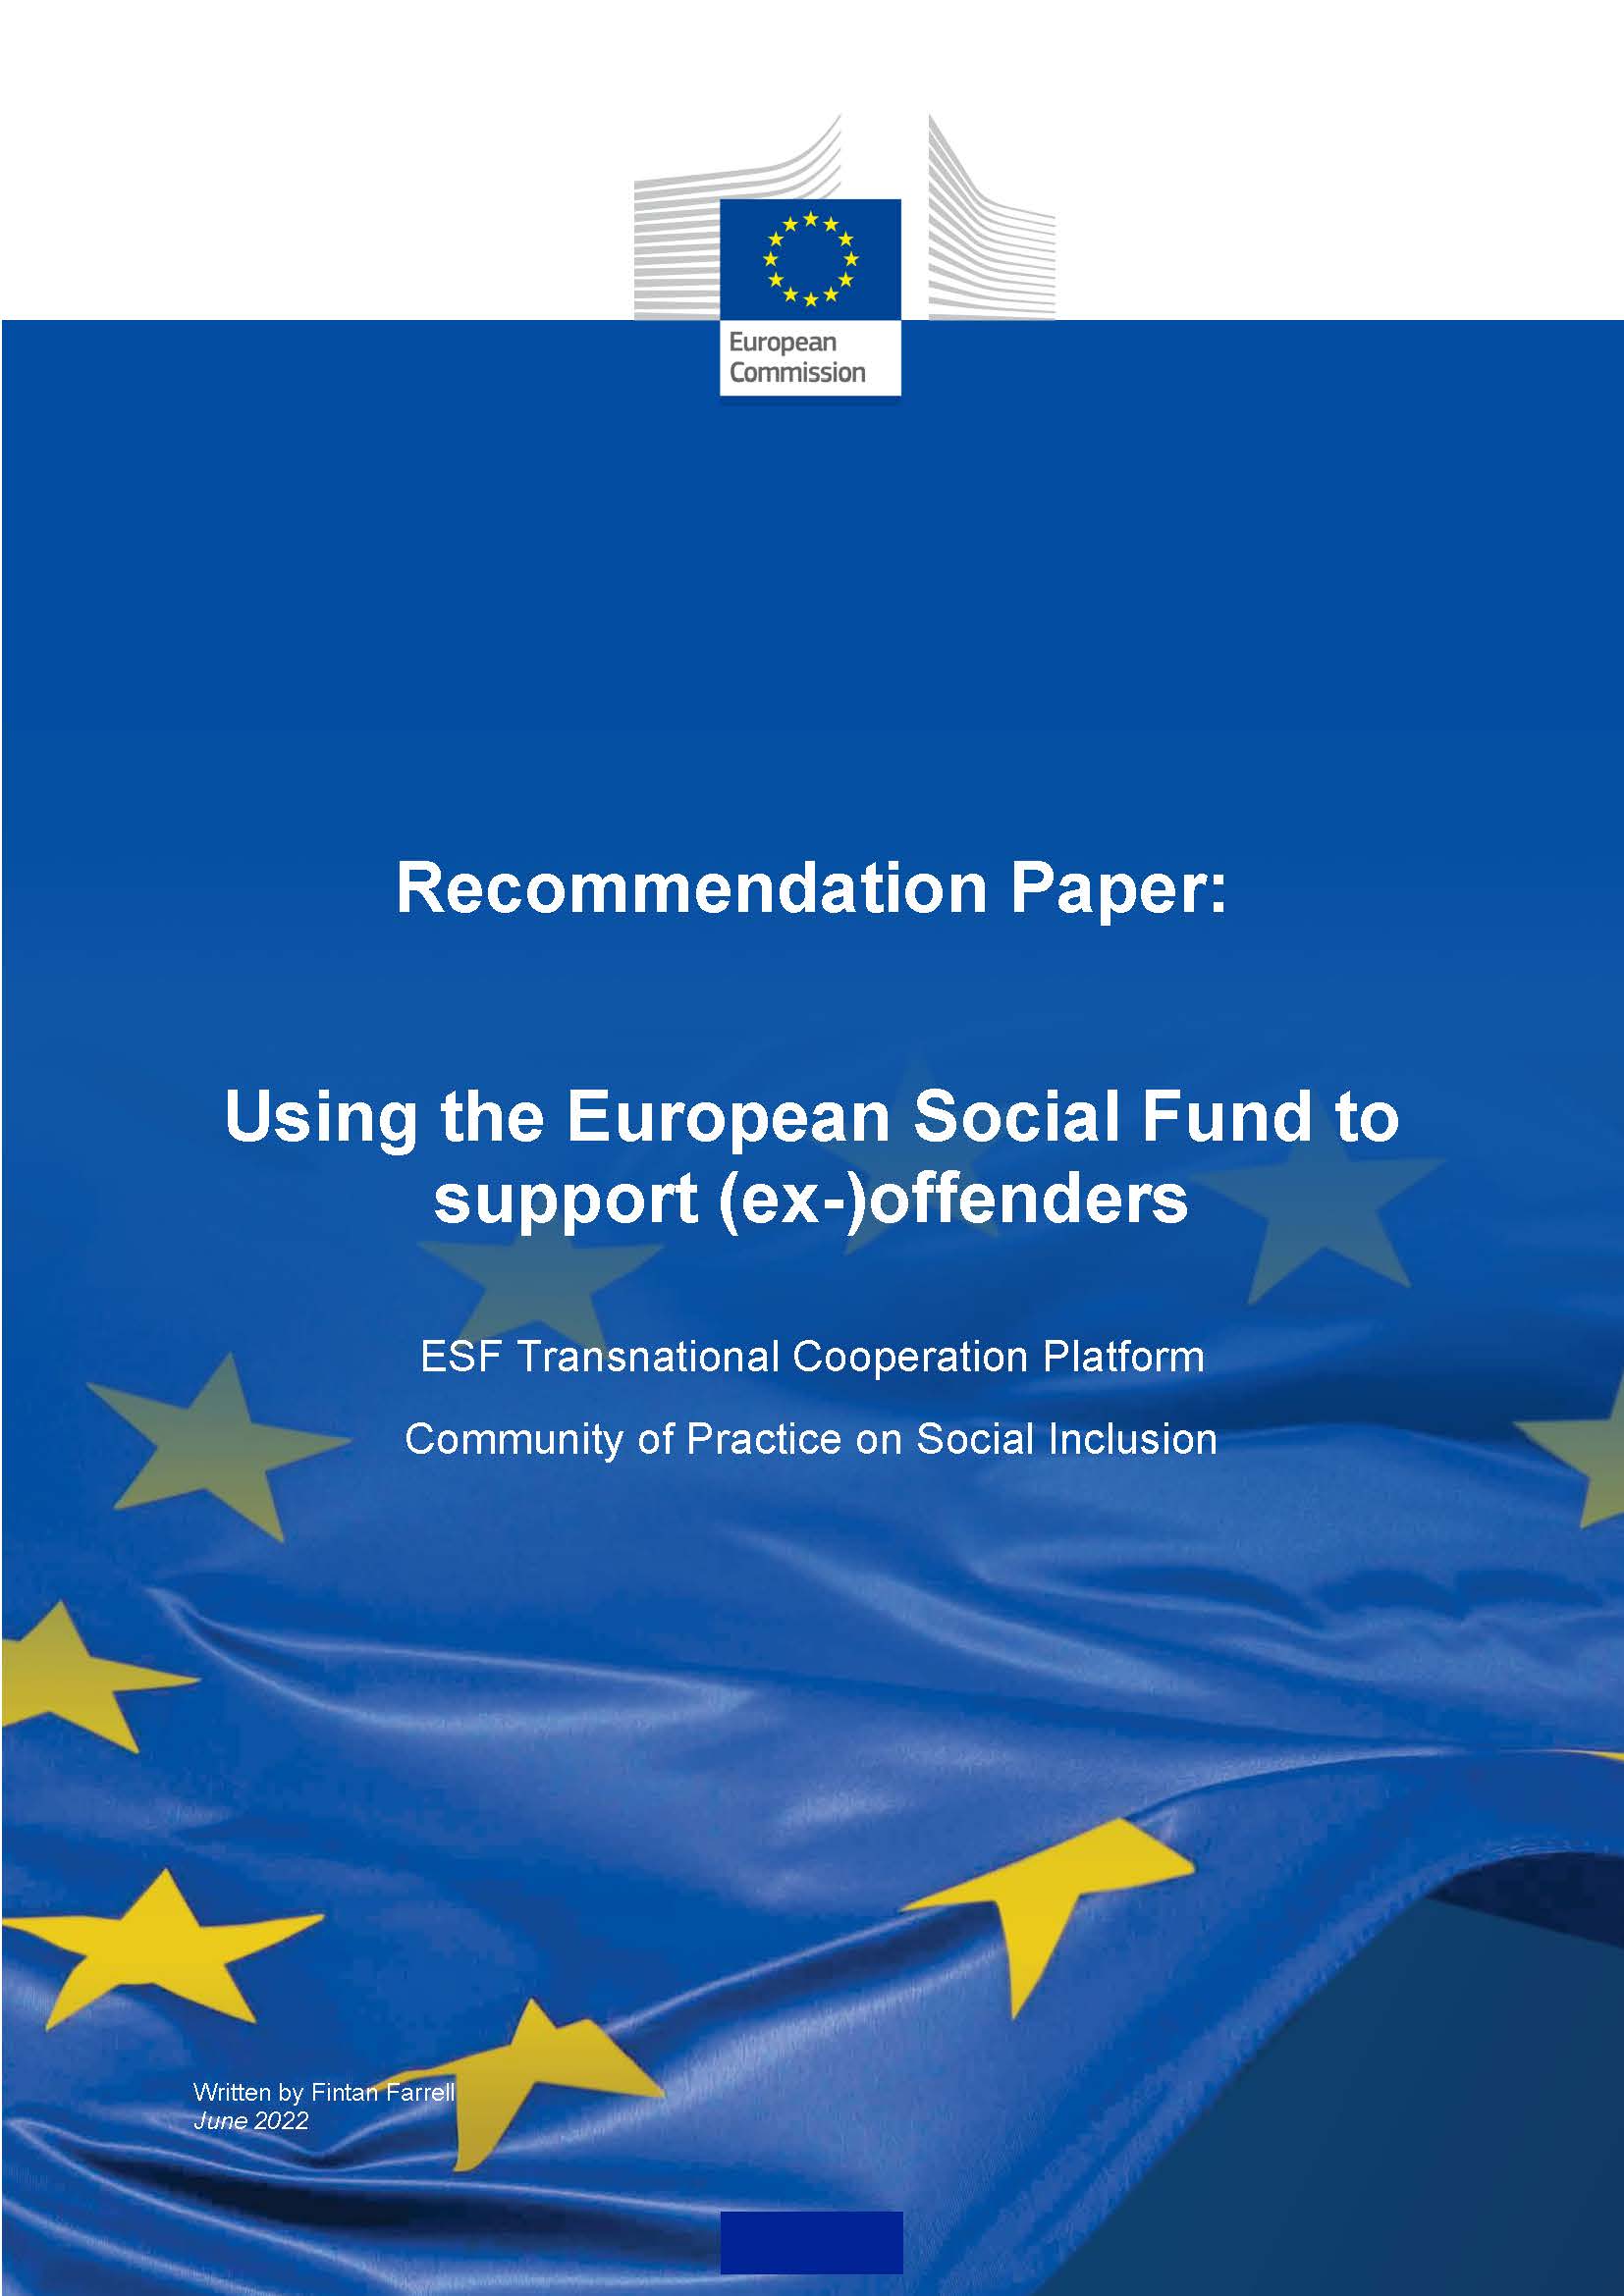 Recommendation Paper:
Using the European Social Fund to support (ex-)offenders